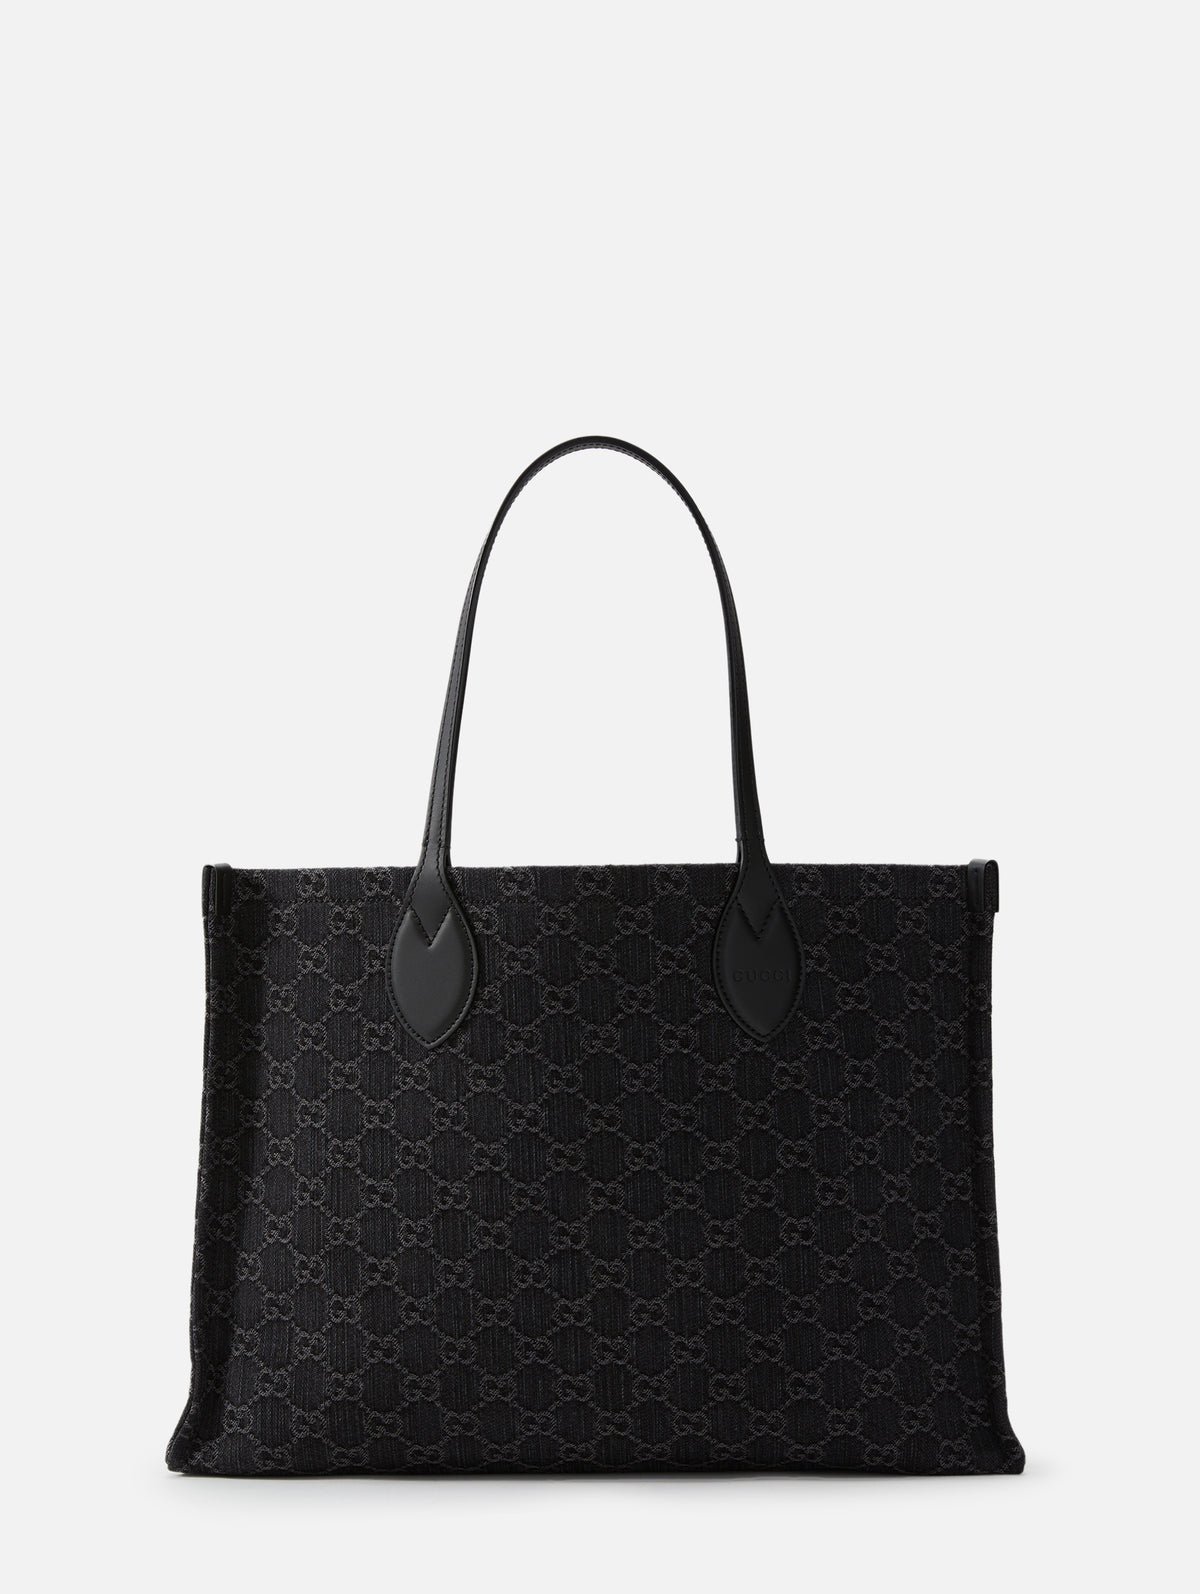 view 1 - Ophidia Tote